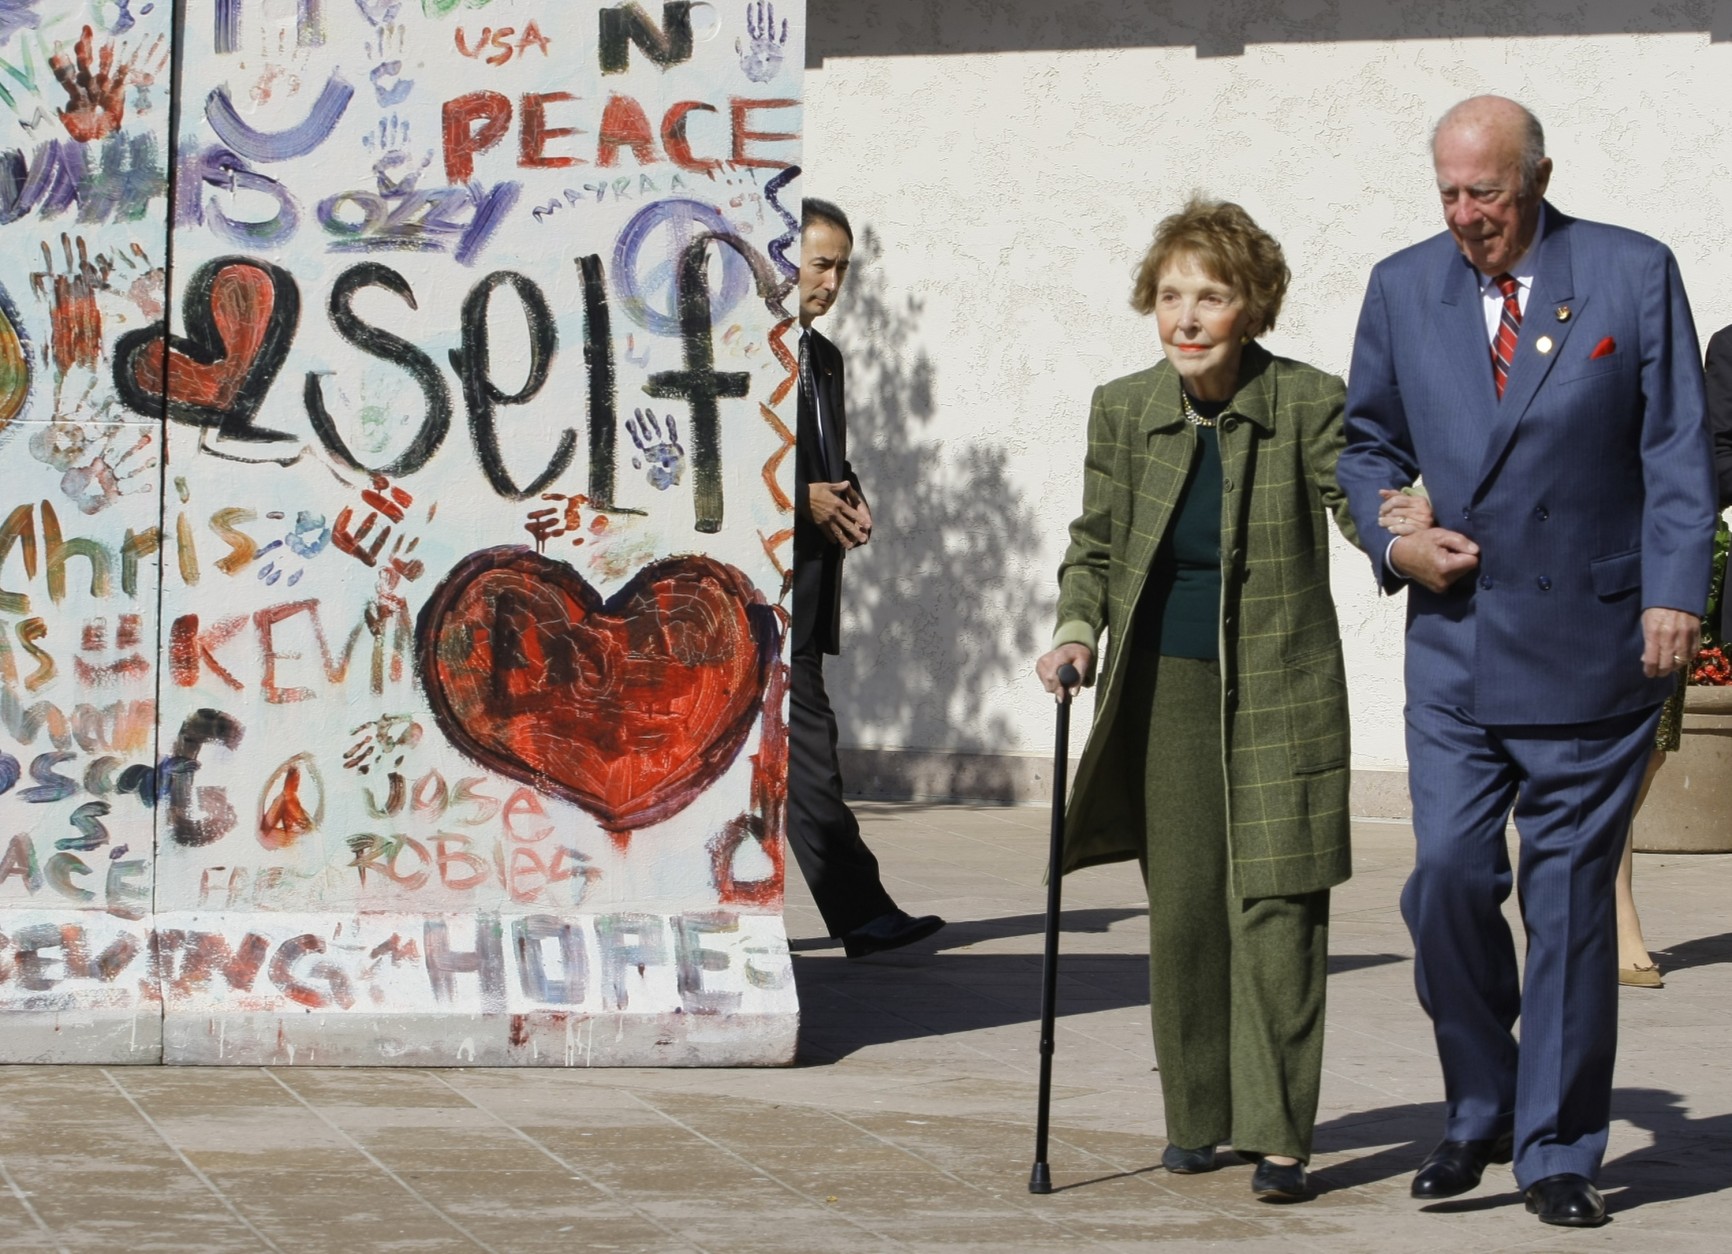 Former First Lady Nancy Reagan, left, is helped by George Shultz, Secretary of State under President Reagan, as they arrive at The Ronald Reagan Presidential Library in Simi Valley, Calif. on Friday, November 6, 2009. The Ronald Reagan Presidential Foundation and Library and The Heritage Foundation commemorate the 20th anniversary of the fall of the Berlin Wall and the advent of freedom and democracy in Eastern Europe. (AP Photo/Damian Dovarganes)